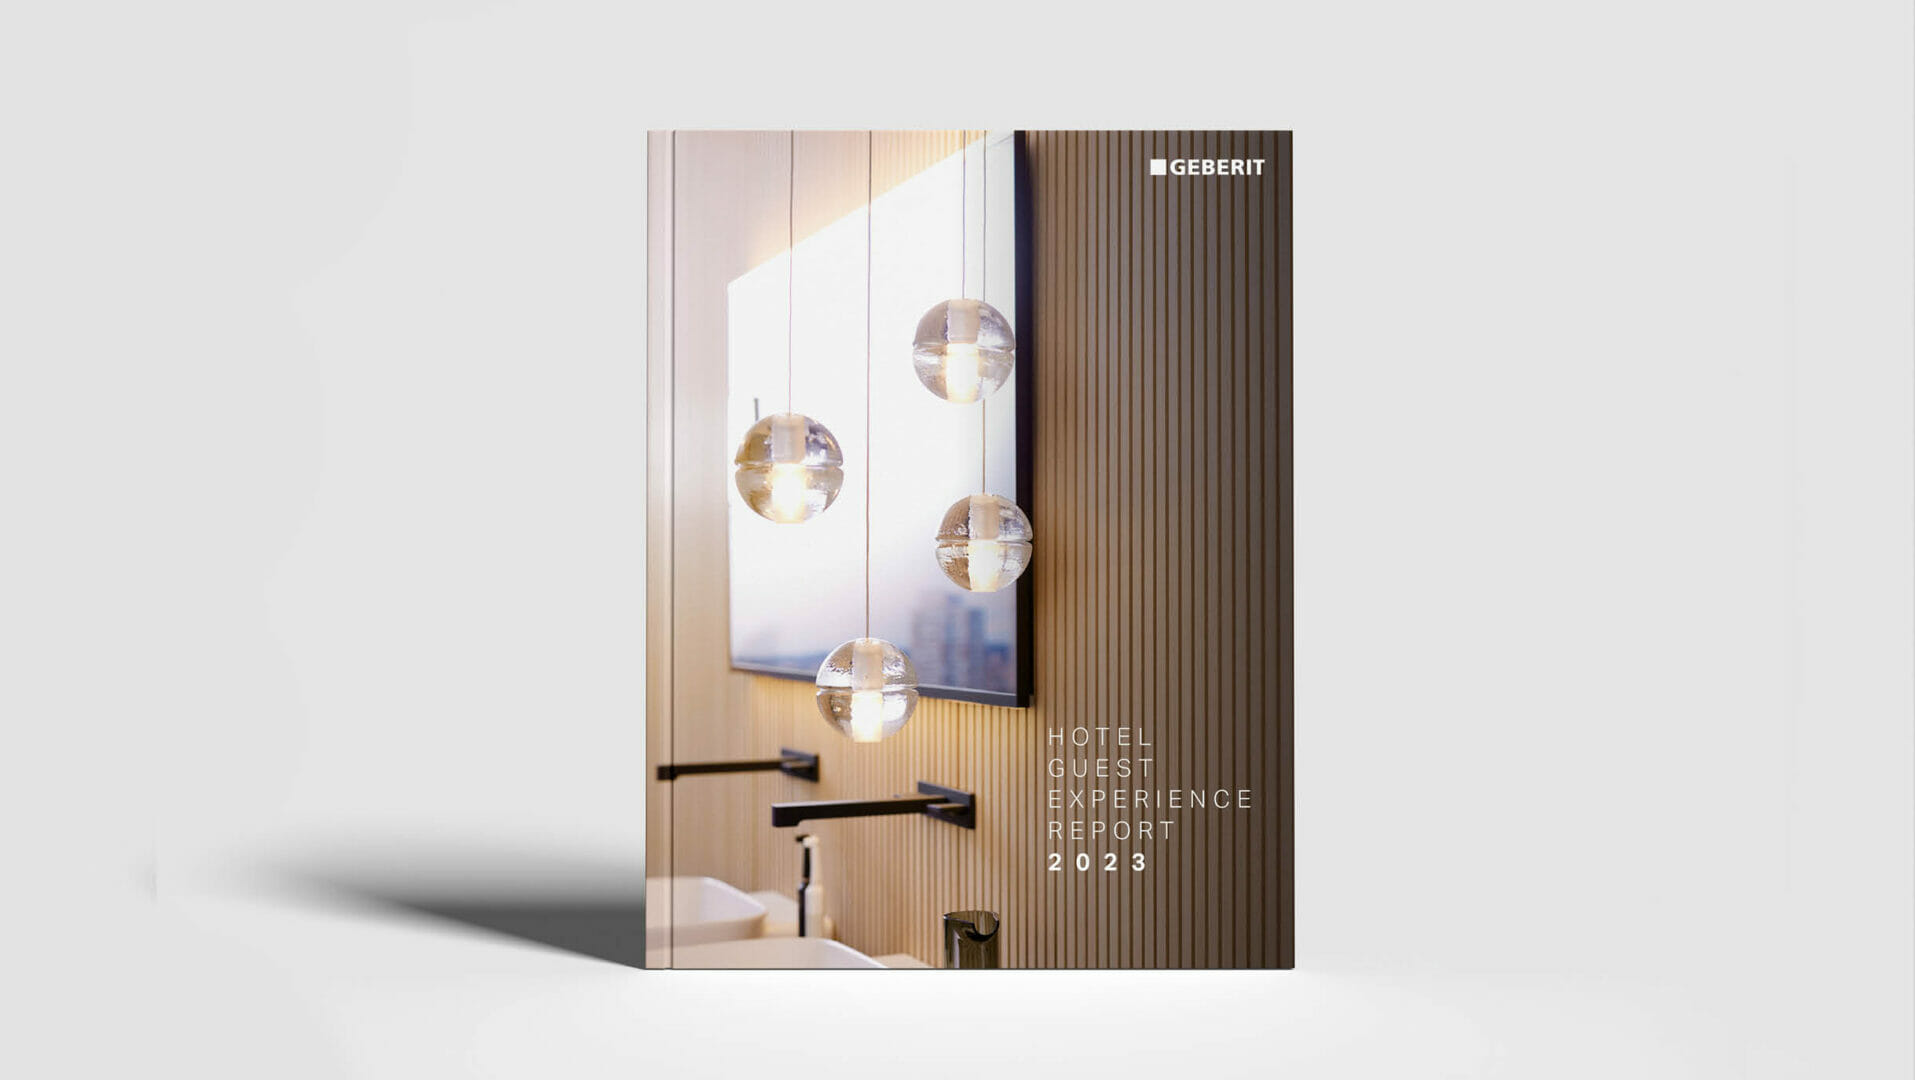 Geberit partners with top industry experts to launch 2023 Hotel Guest Experience Report